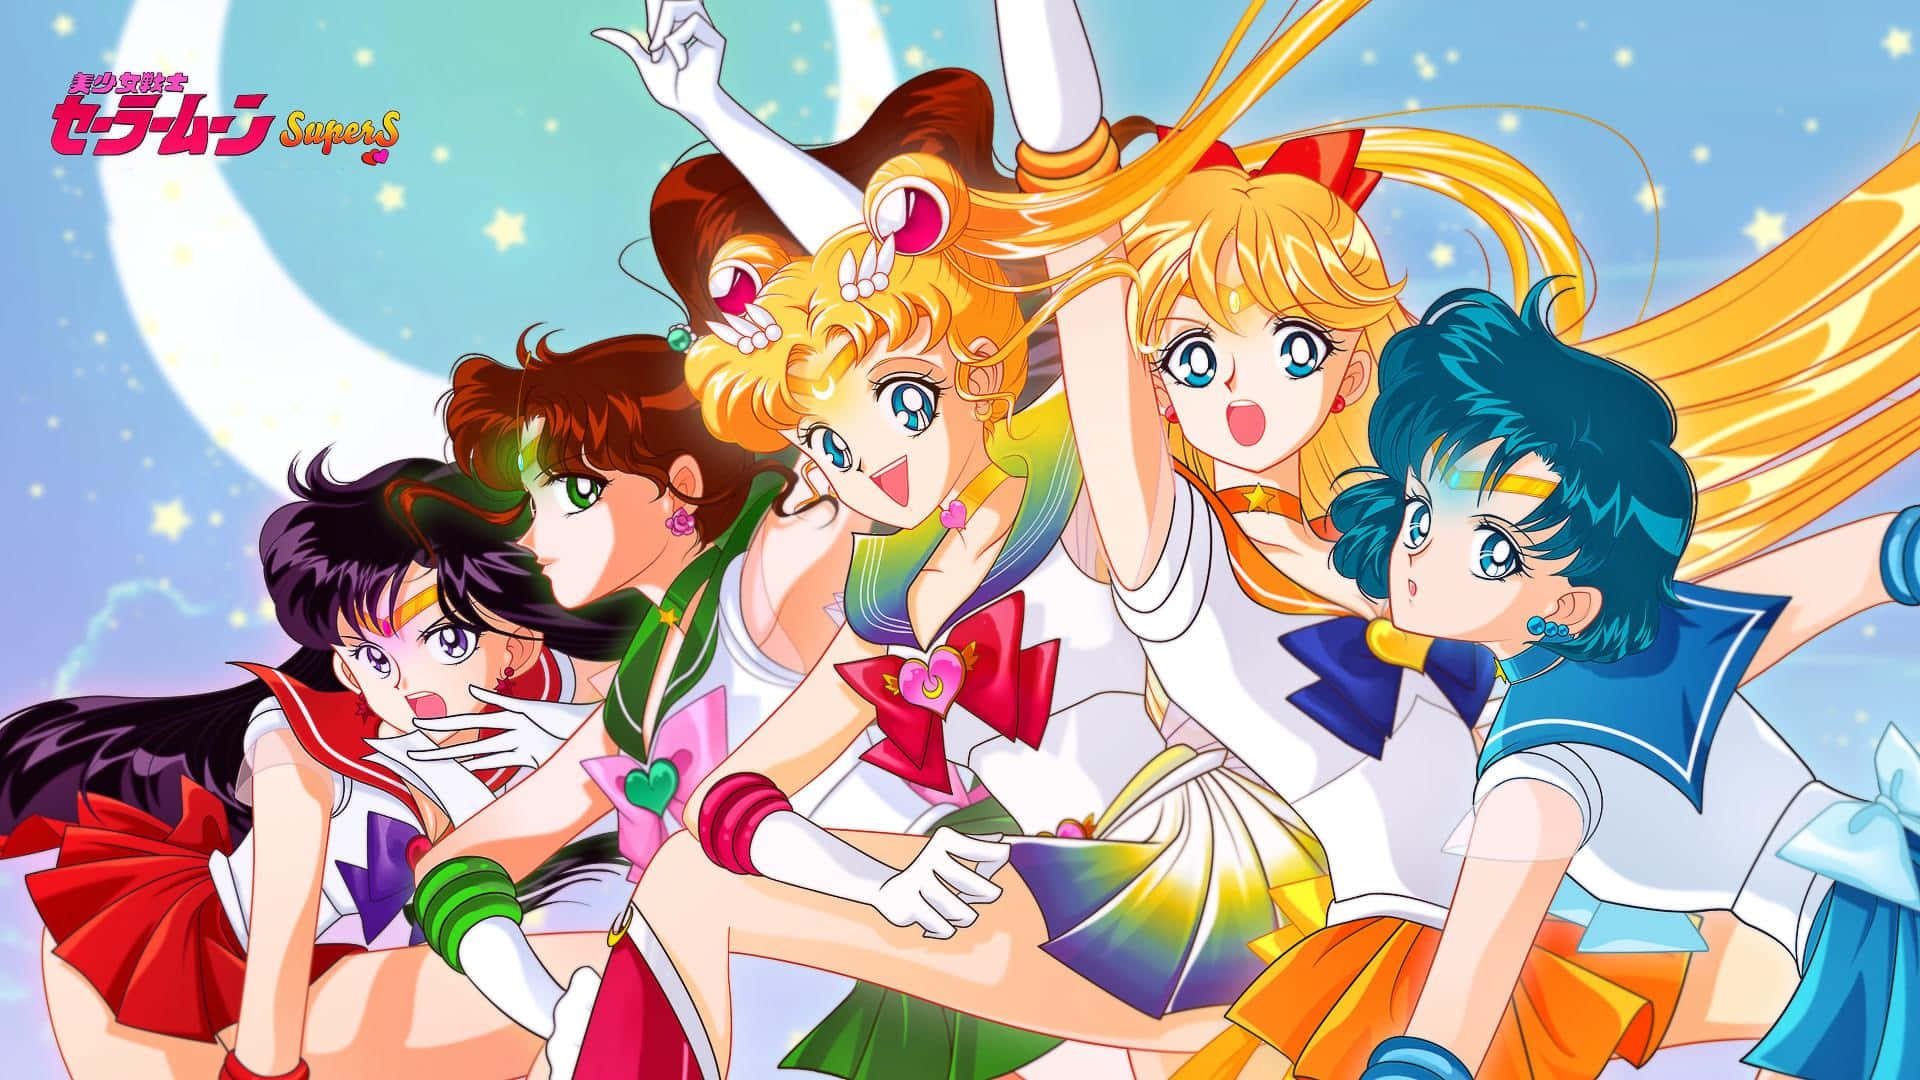 Join the Guardian Senshi in their Adventure to Protect the Moon Wallpaper